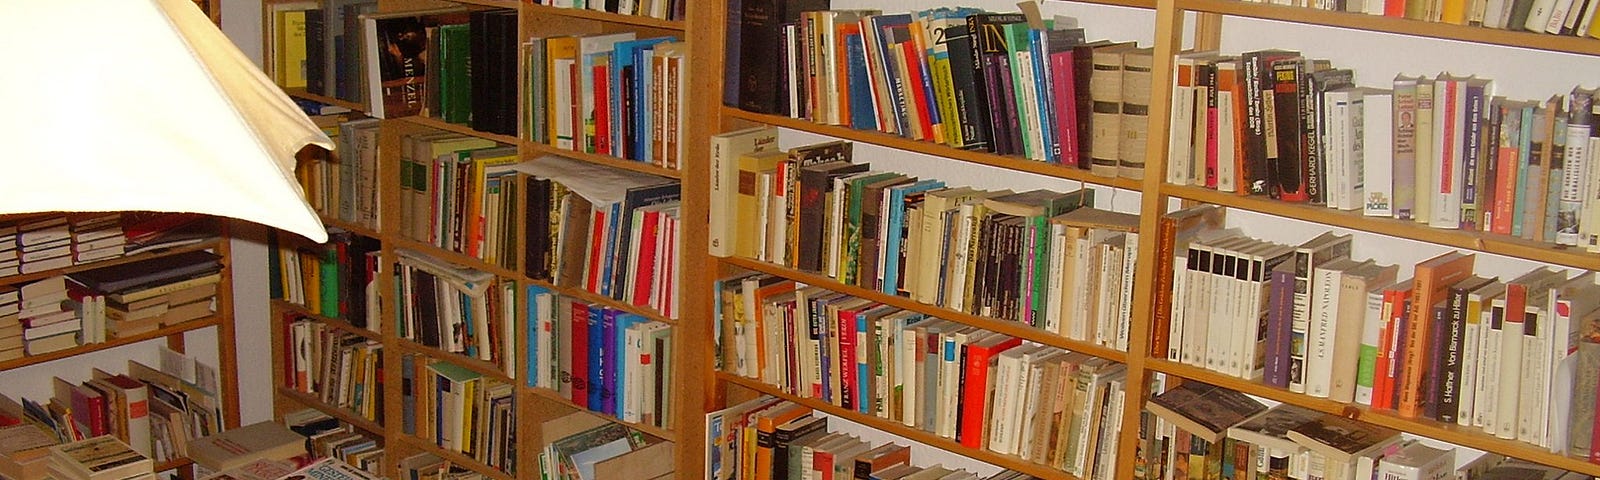 Image of Clutter: A room filled with books packing all bookcases, tables and all along the floor with no room to move or access the bookcase safely